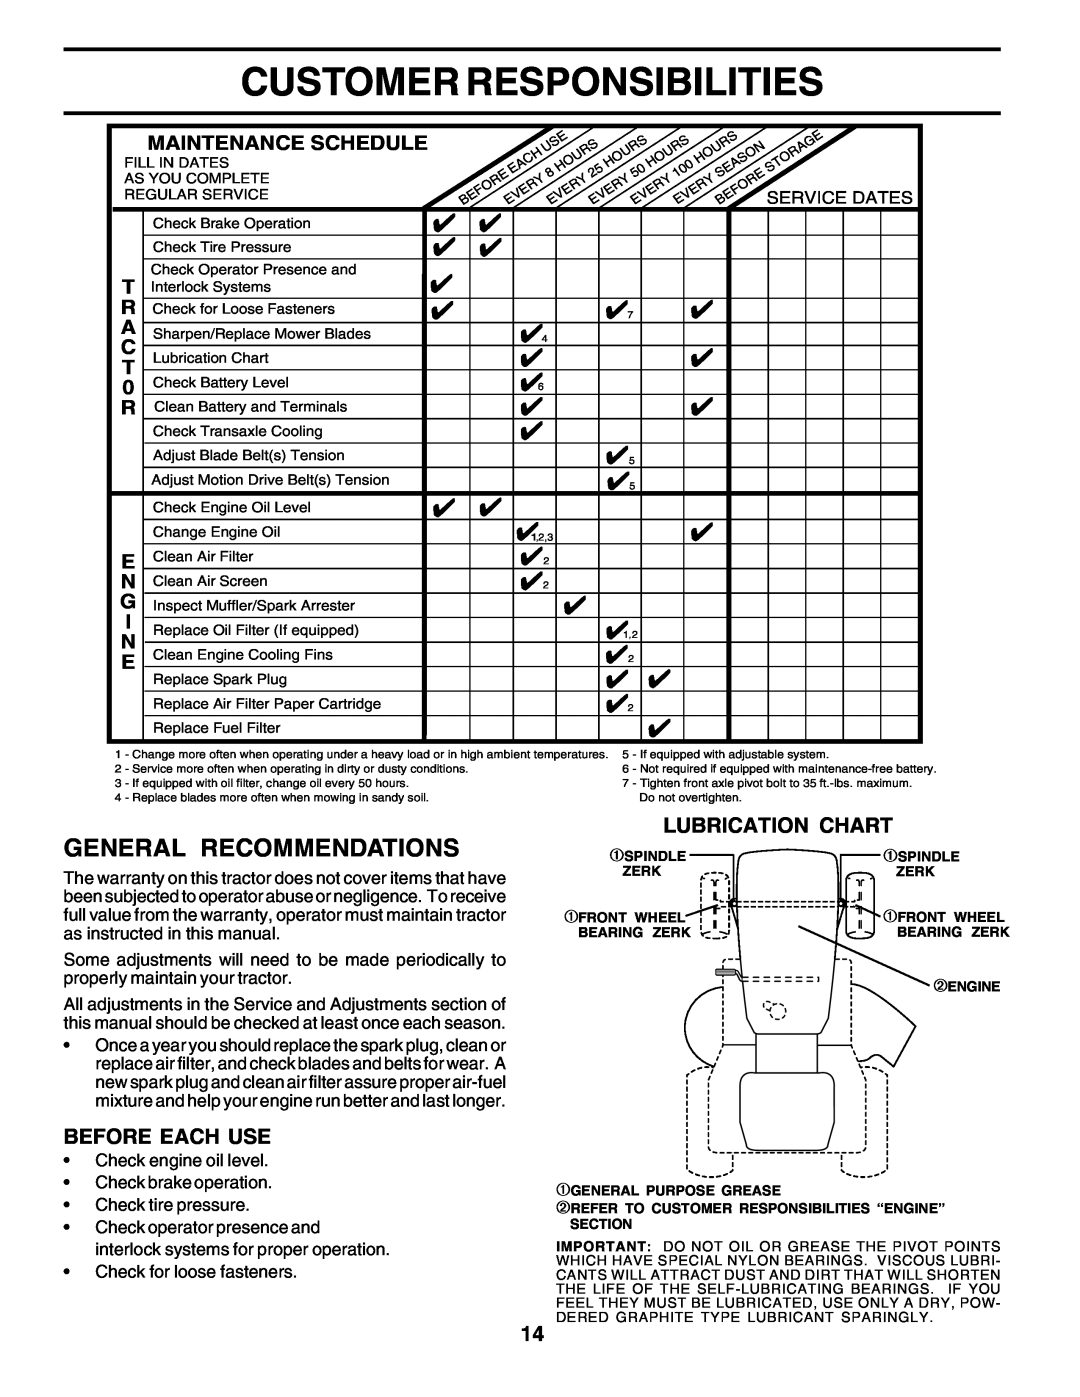 Poulan 179416 manual Customer Responsibilities, General Recommendations, Before Each Use, Lubrication Chart 